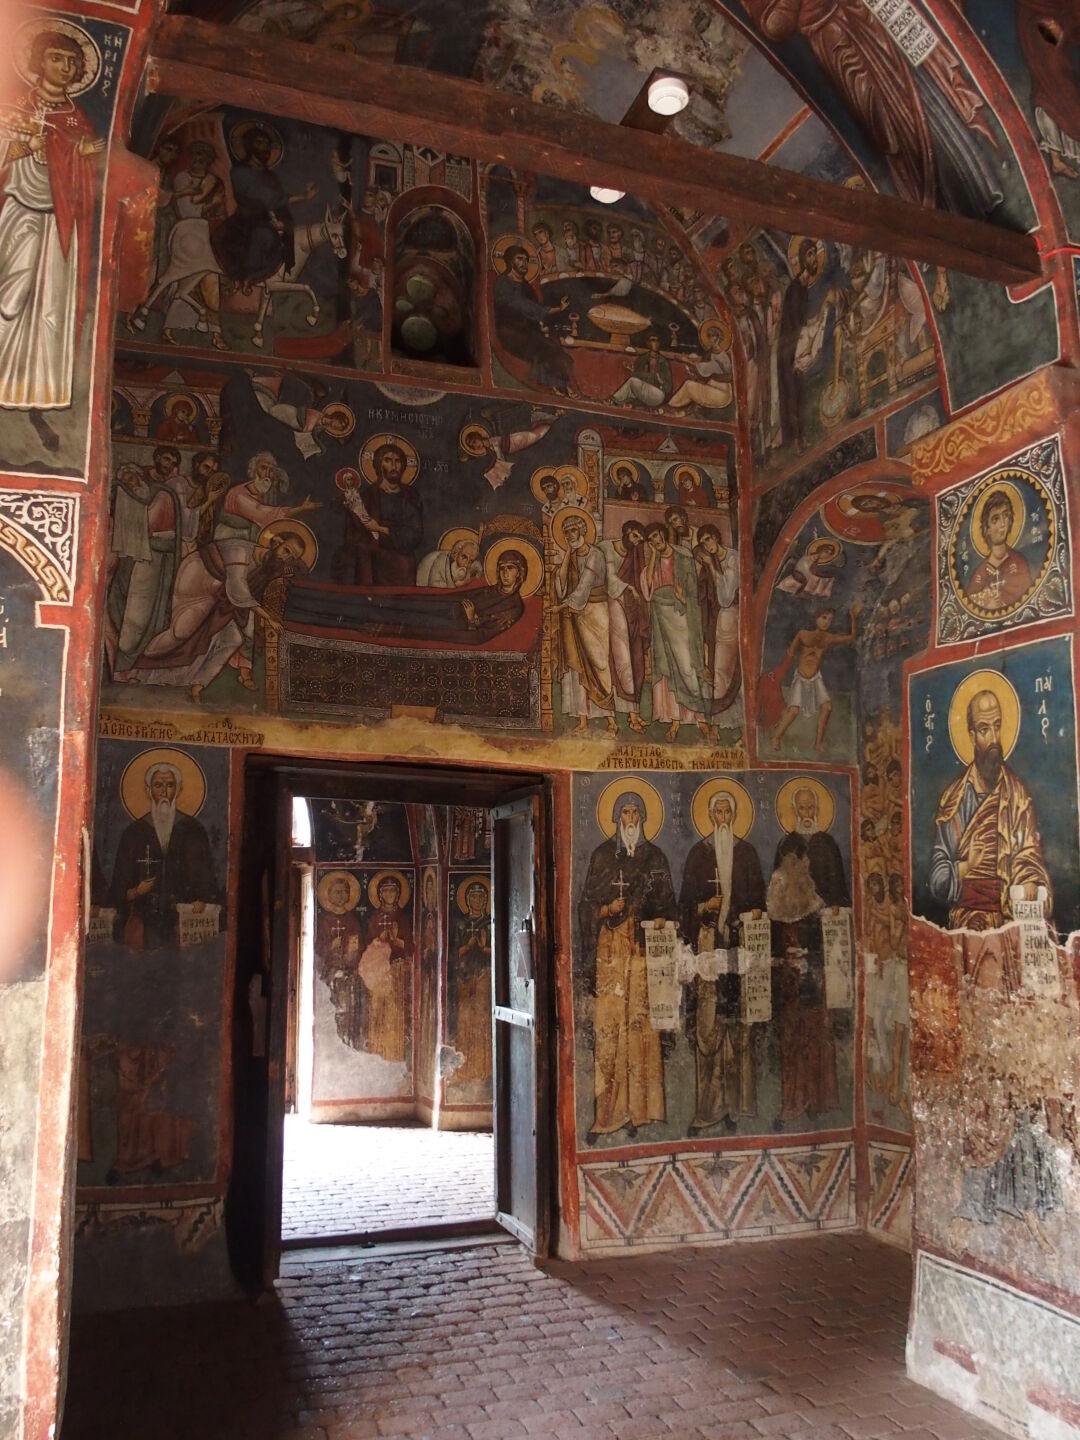 The inside of the chapel is why it is recognized as a world cultural heritage. The oldest iconographic paintings date from the 11th century A.D.